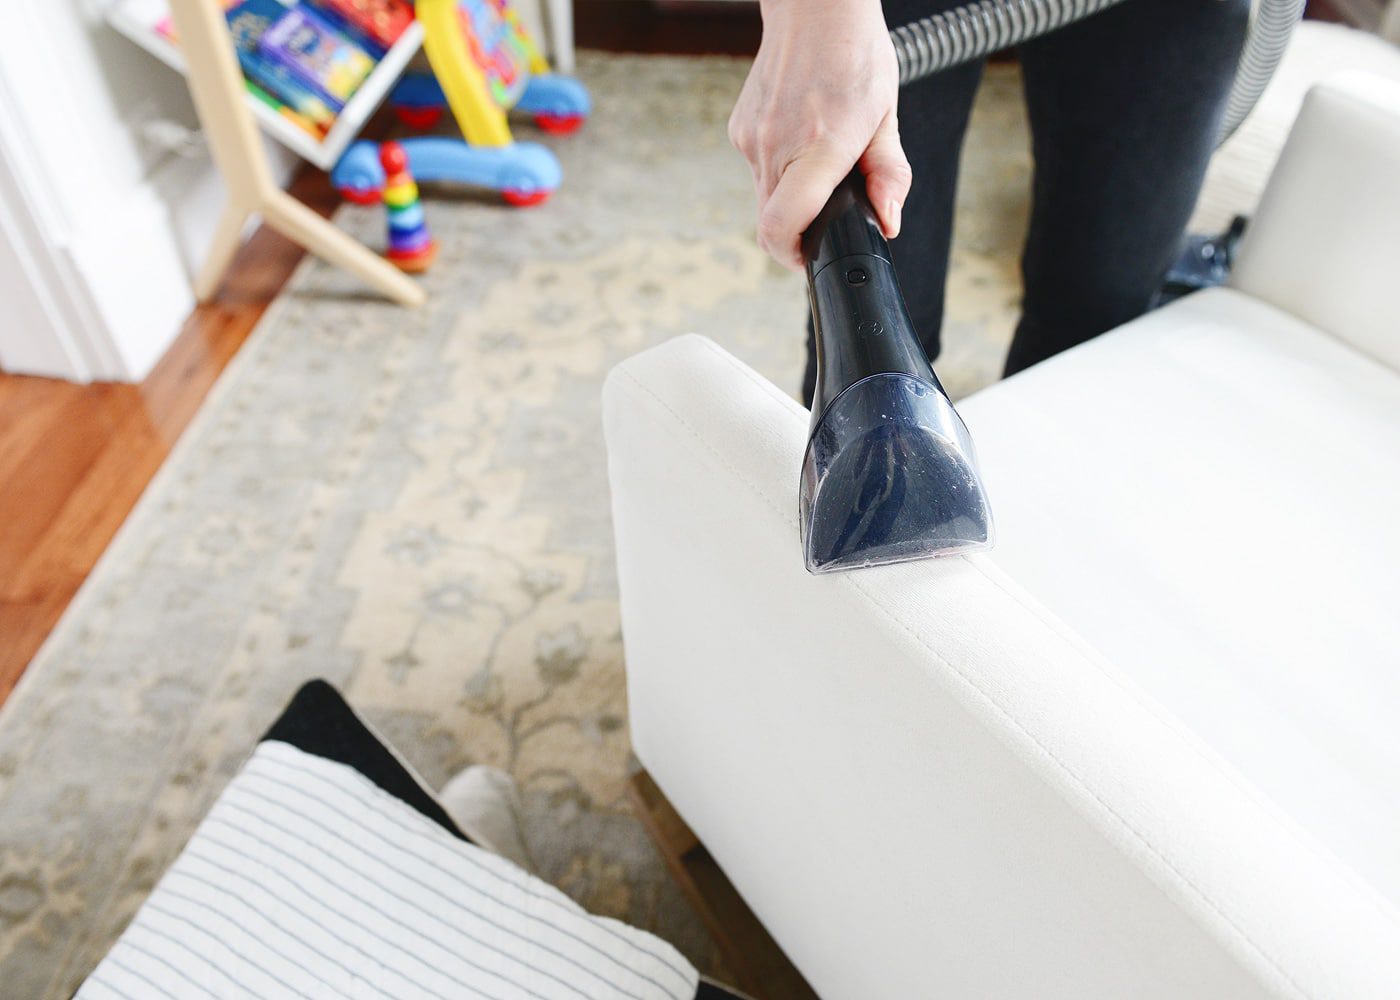 How we clean our upholstered furniture // via Yellow Brick Home